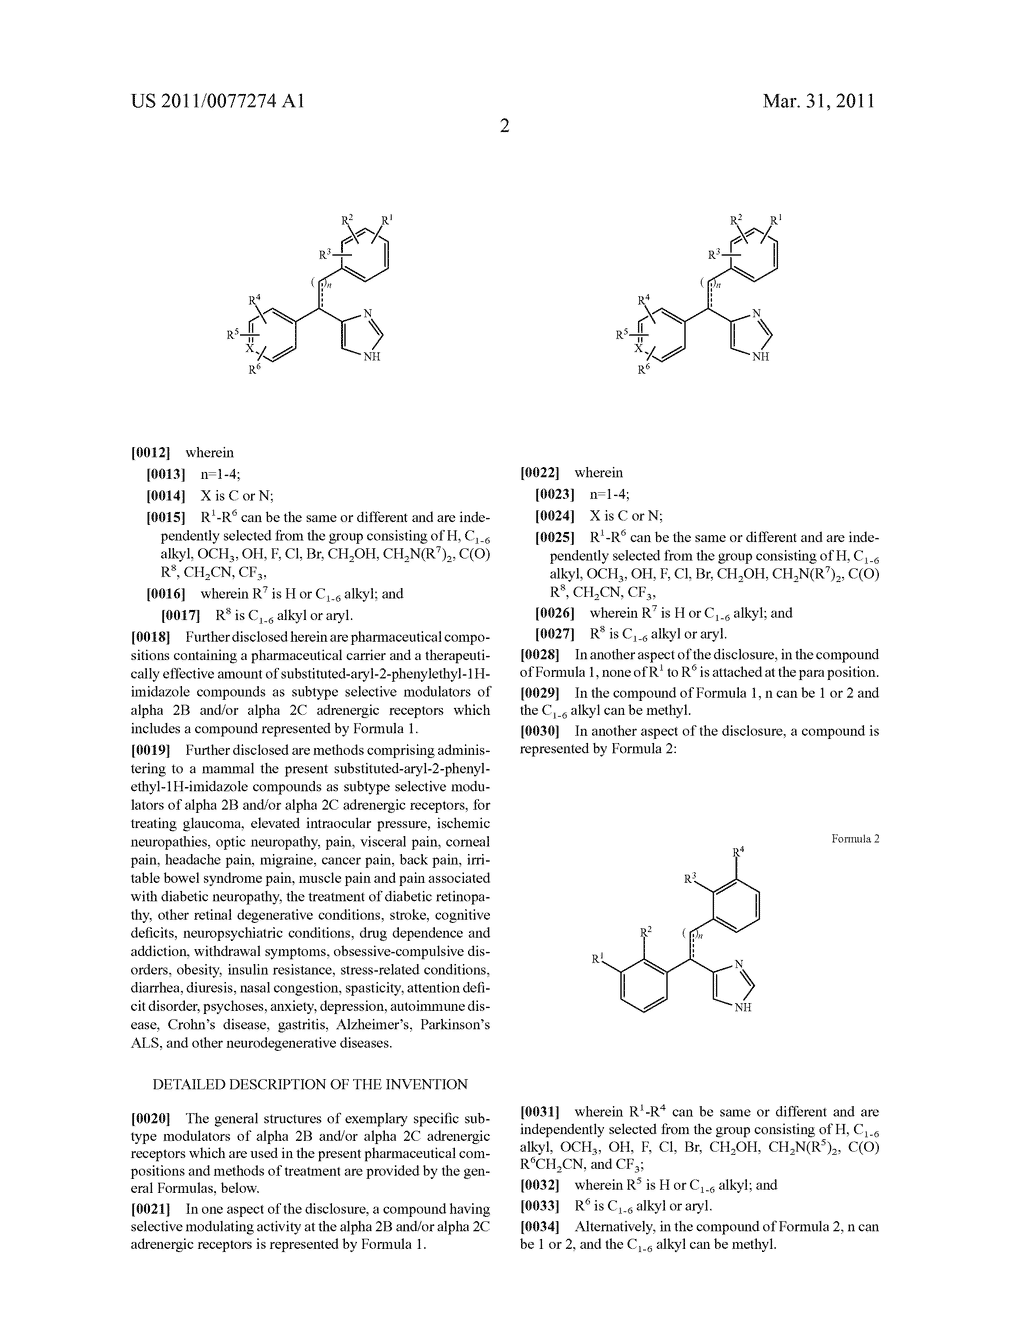 SUBSTITUTED-ARYL-2-PHENYLETHYL-1H-IMIDAZOLE COMPOUNDS AS SUBTYPE SELECTIVE MODULATORS OF ALPHA 2B AND/OR ALPHA 2C ADRENERGIC RECEPTORS - diagram, schematic, and image 03